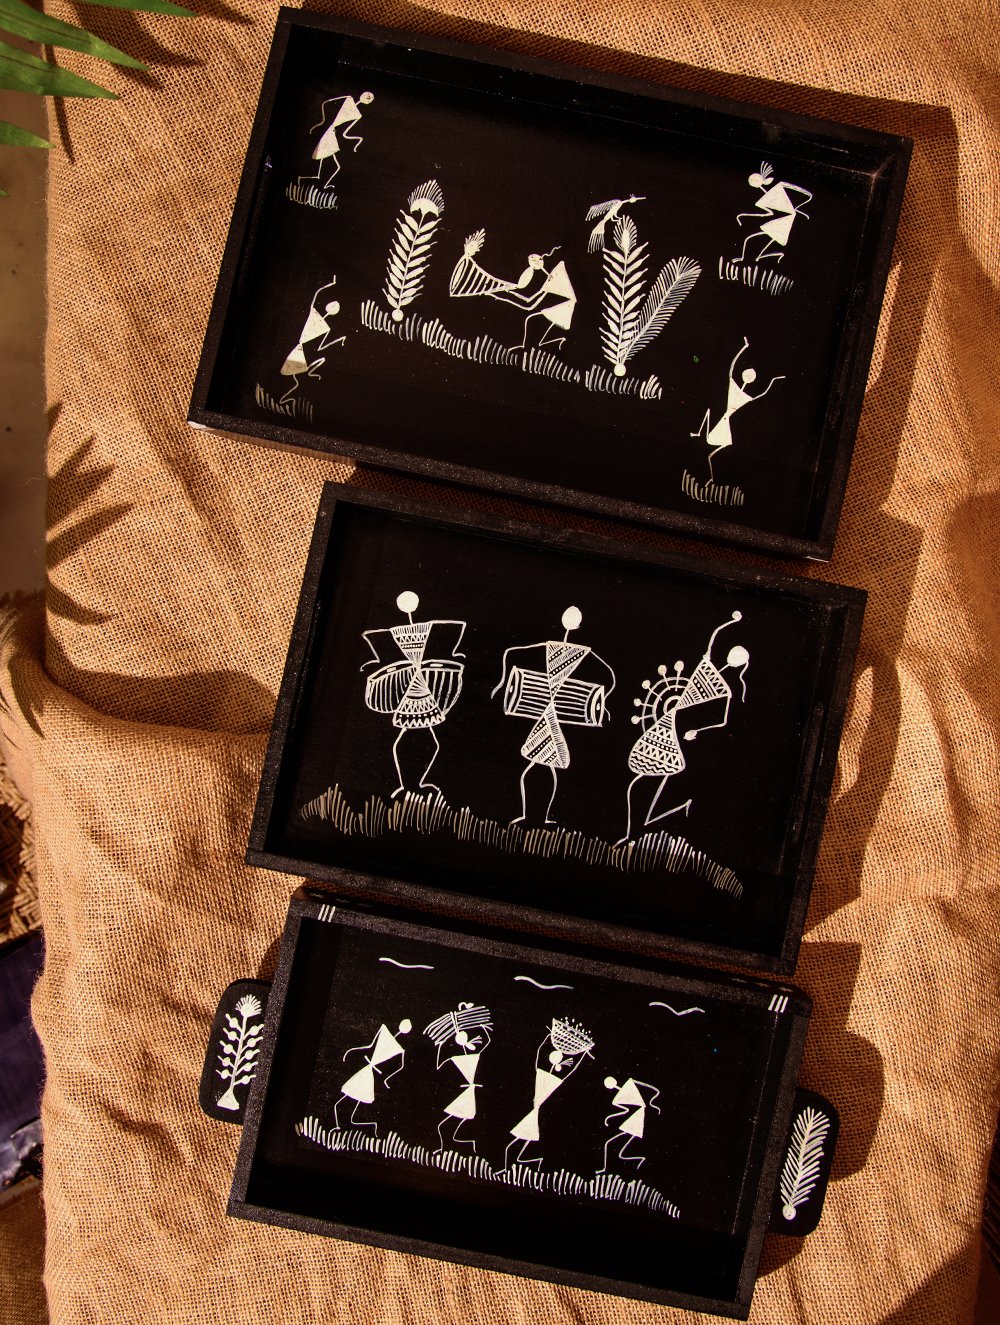 Load image into Gallery viewer, Warli Art Decorative Trays (Set of 3) - Black